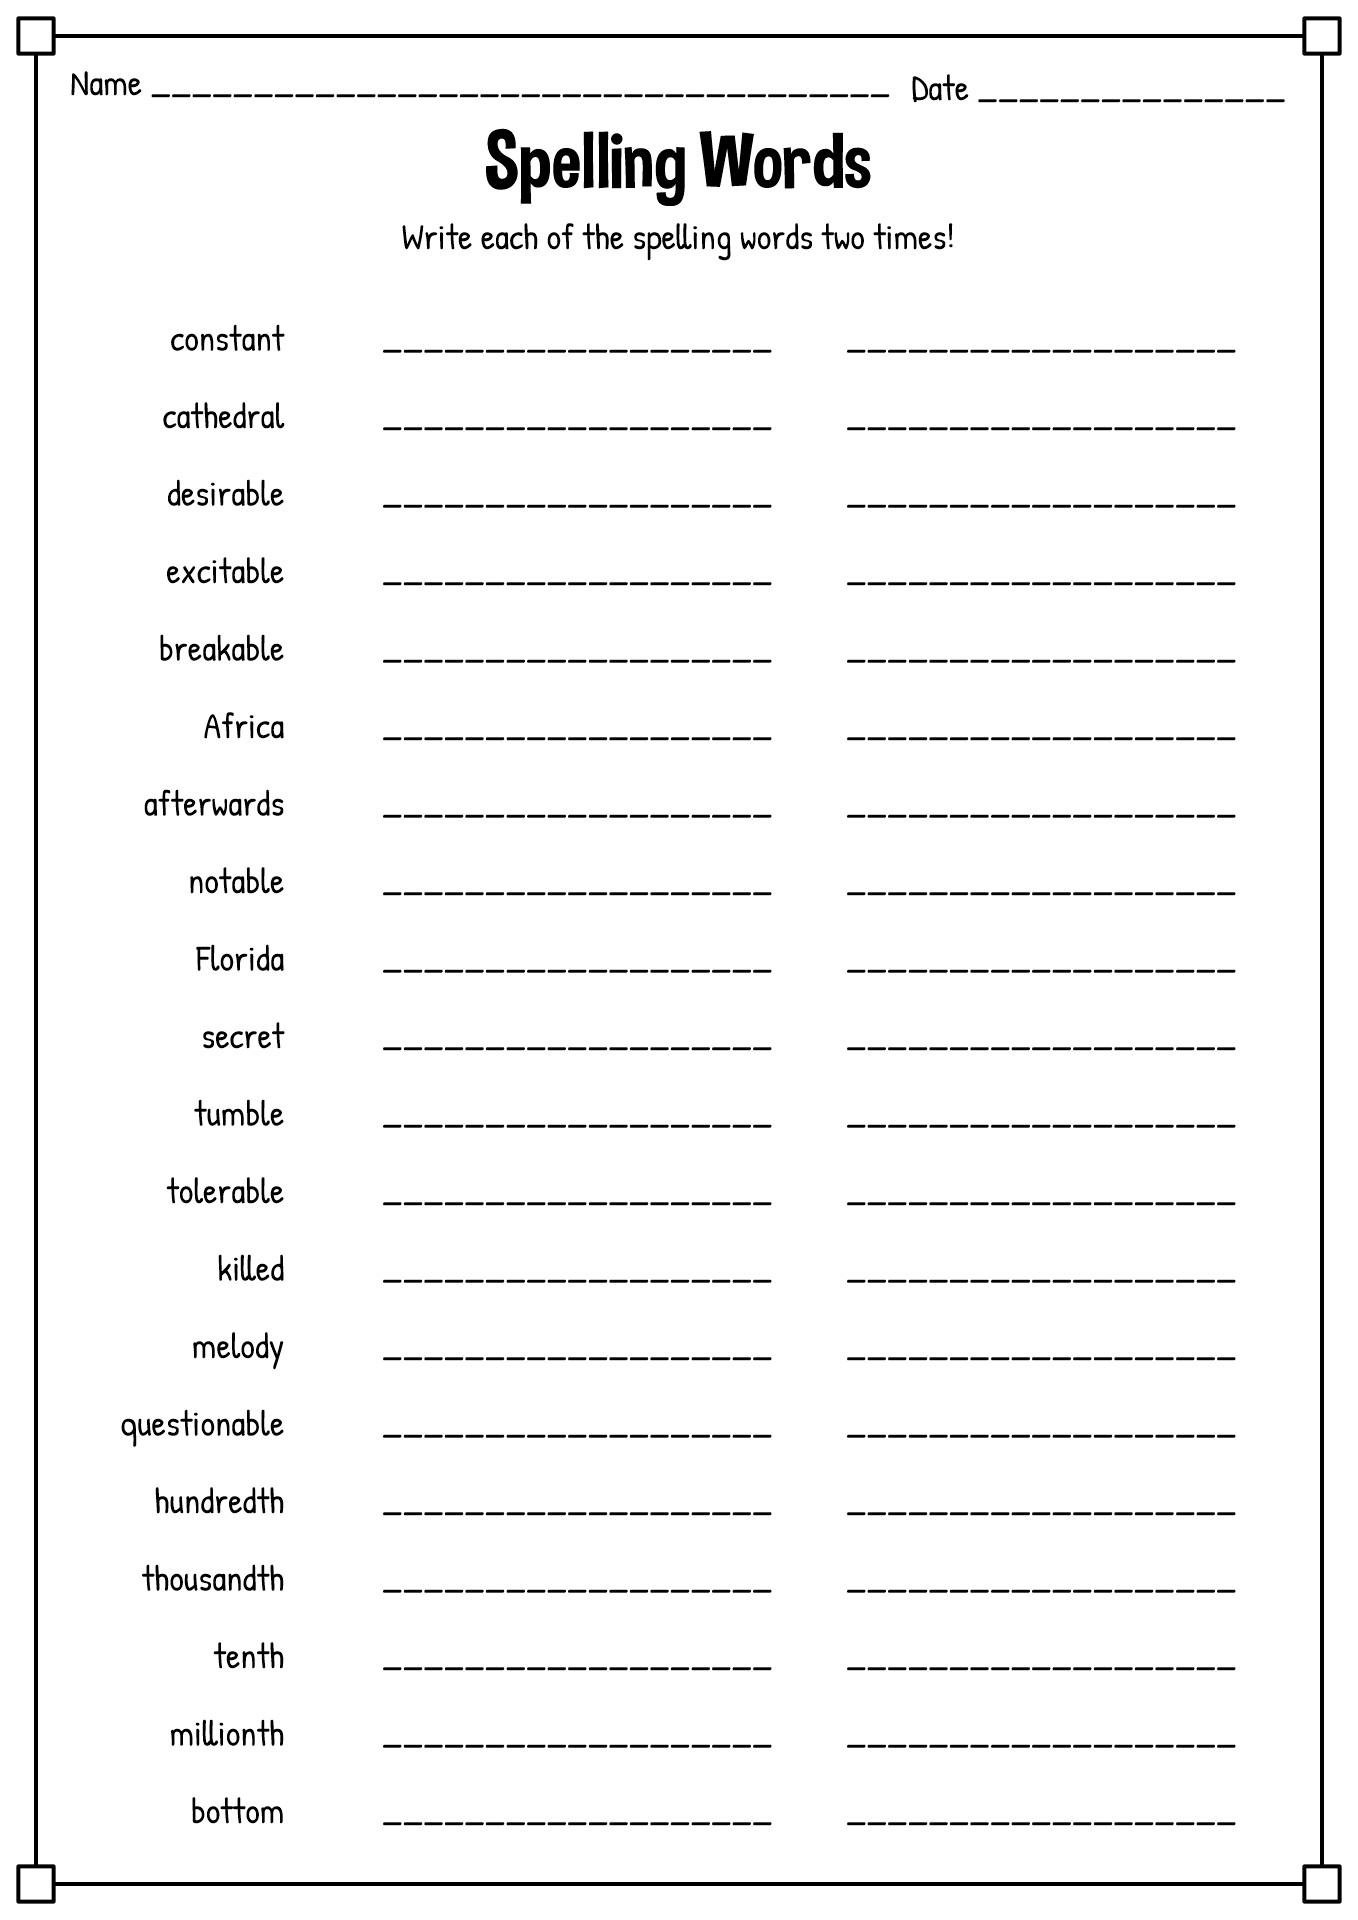 13 Best Images Of Spelling Worksheets For Adults Adult Spelling Worksheets Days Of Week